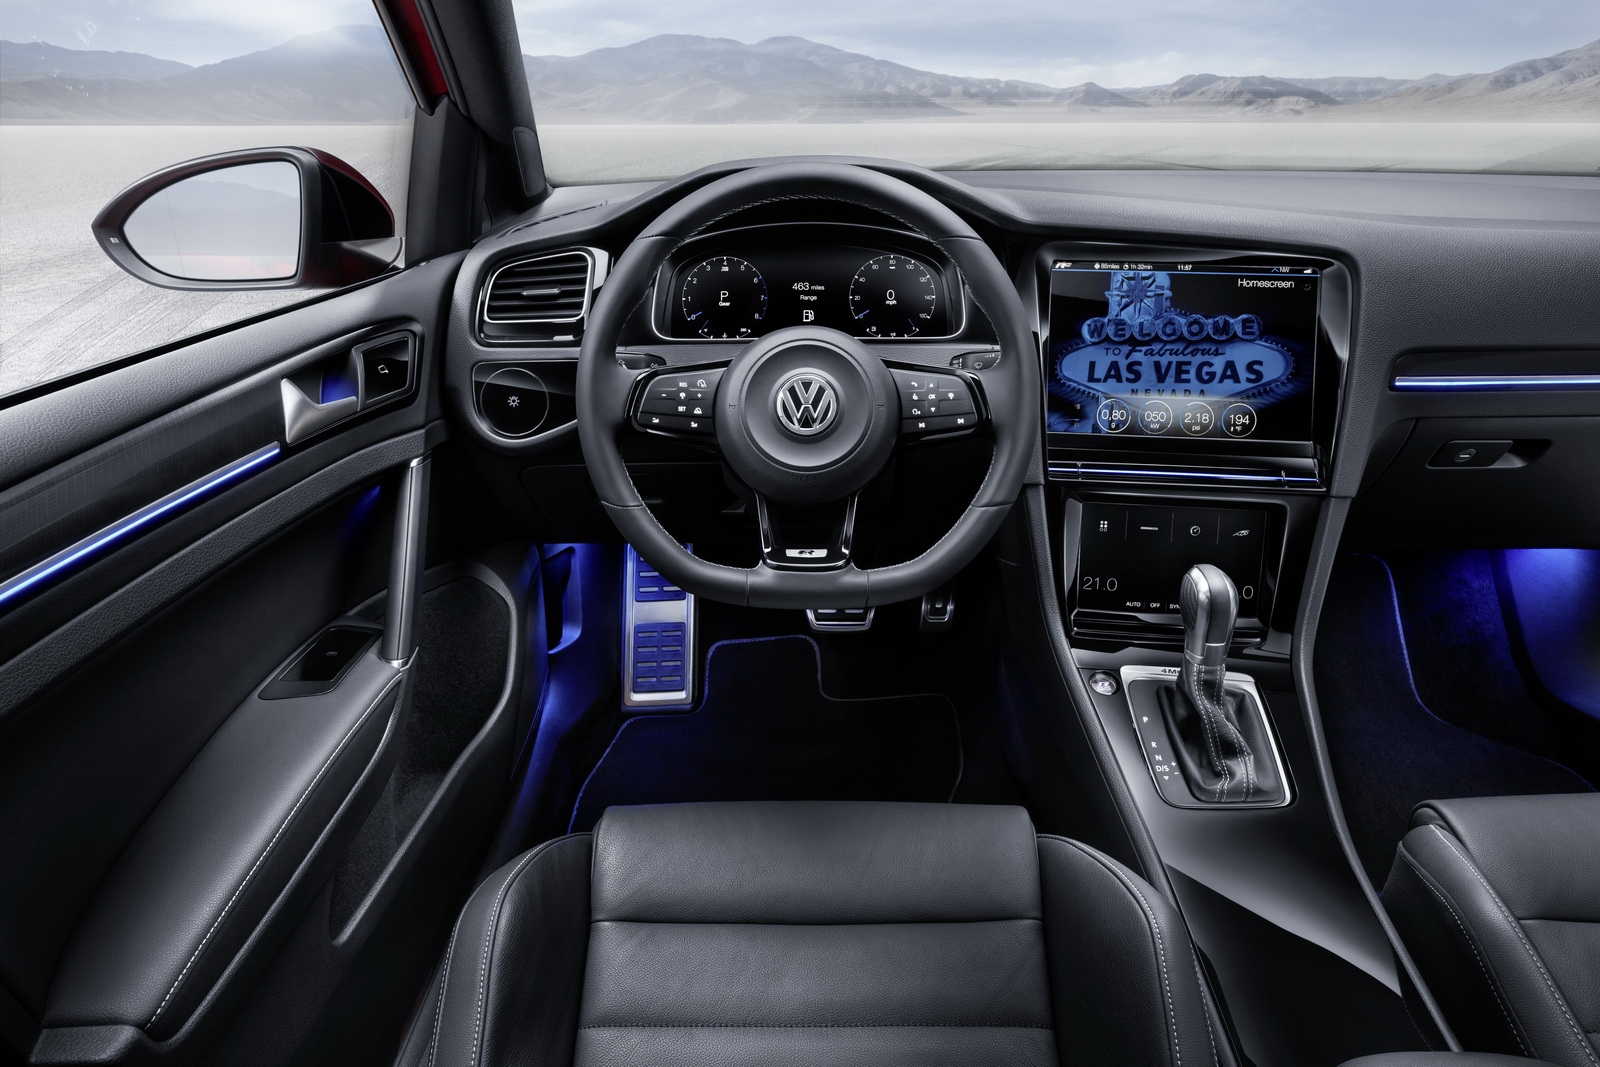 VW Golf R Touch Concept Is All about Displays, Has Gesture Recognition  System [w/Video]